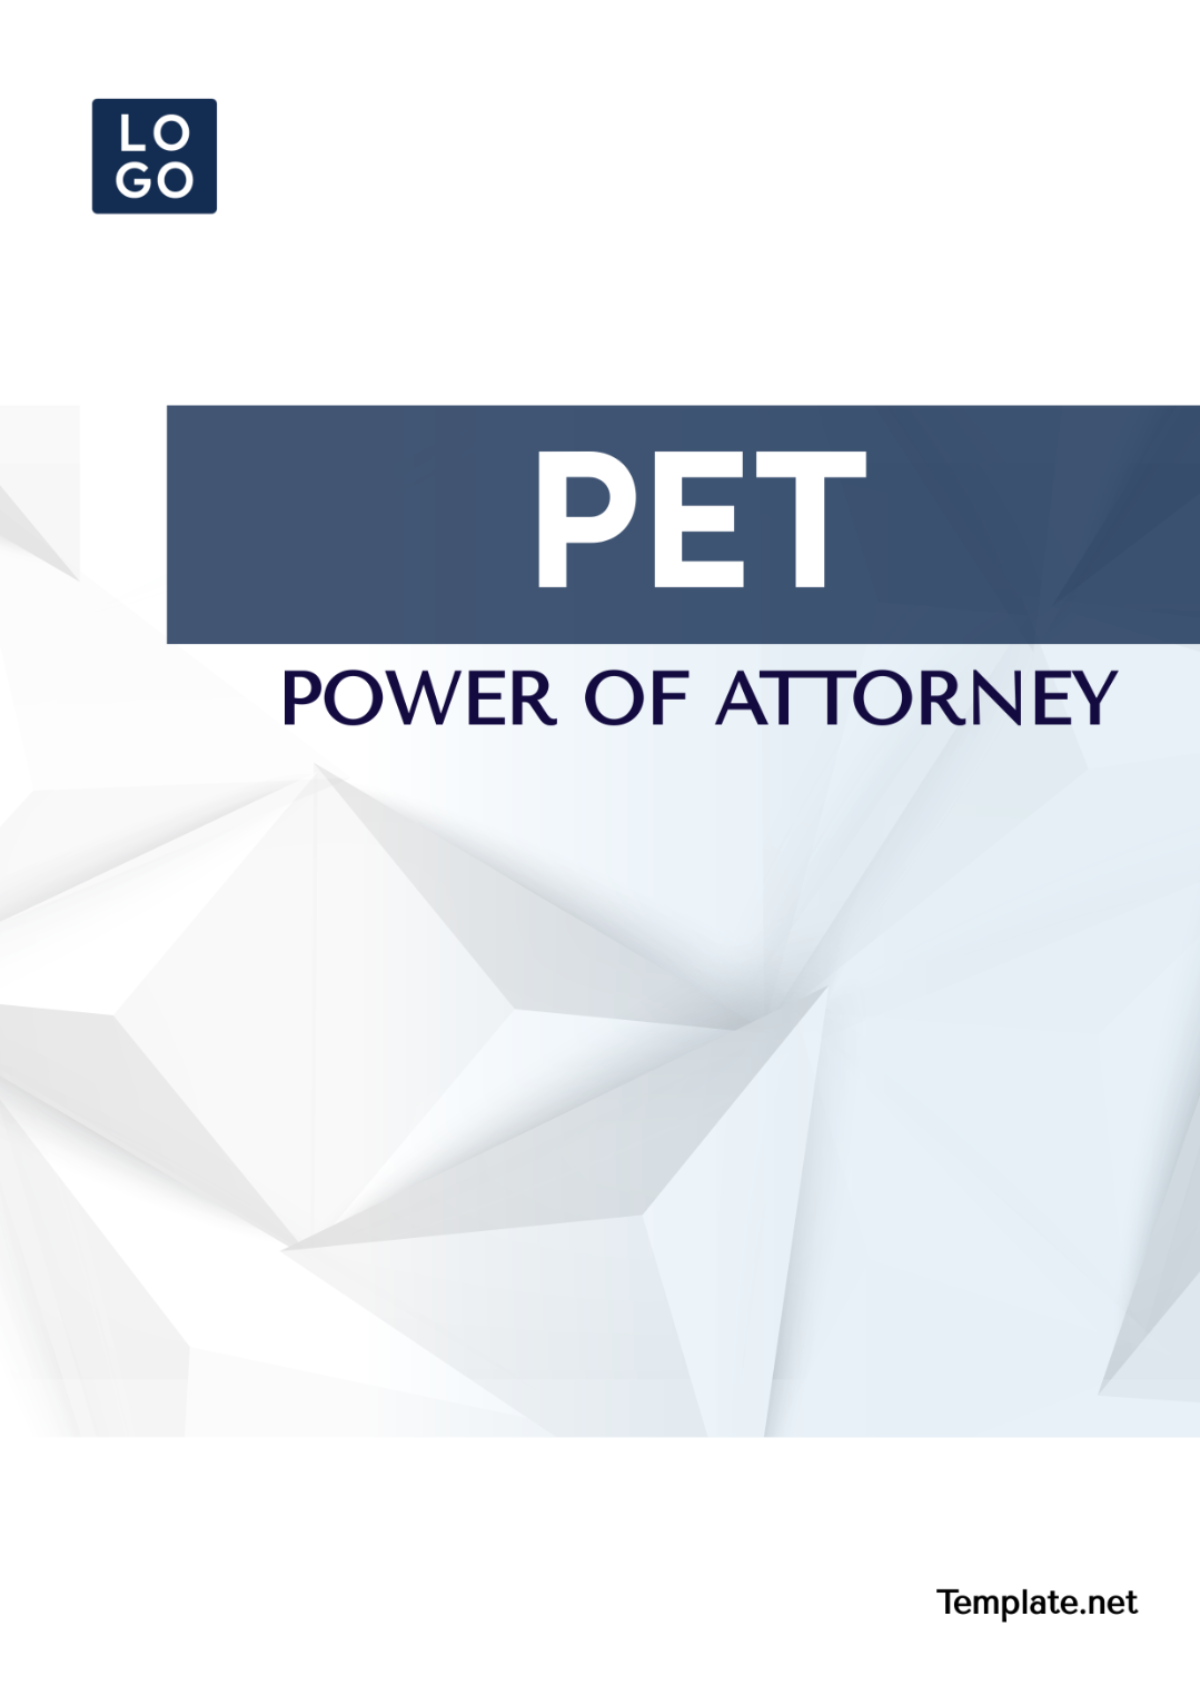 Pet Power of Attorney Template